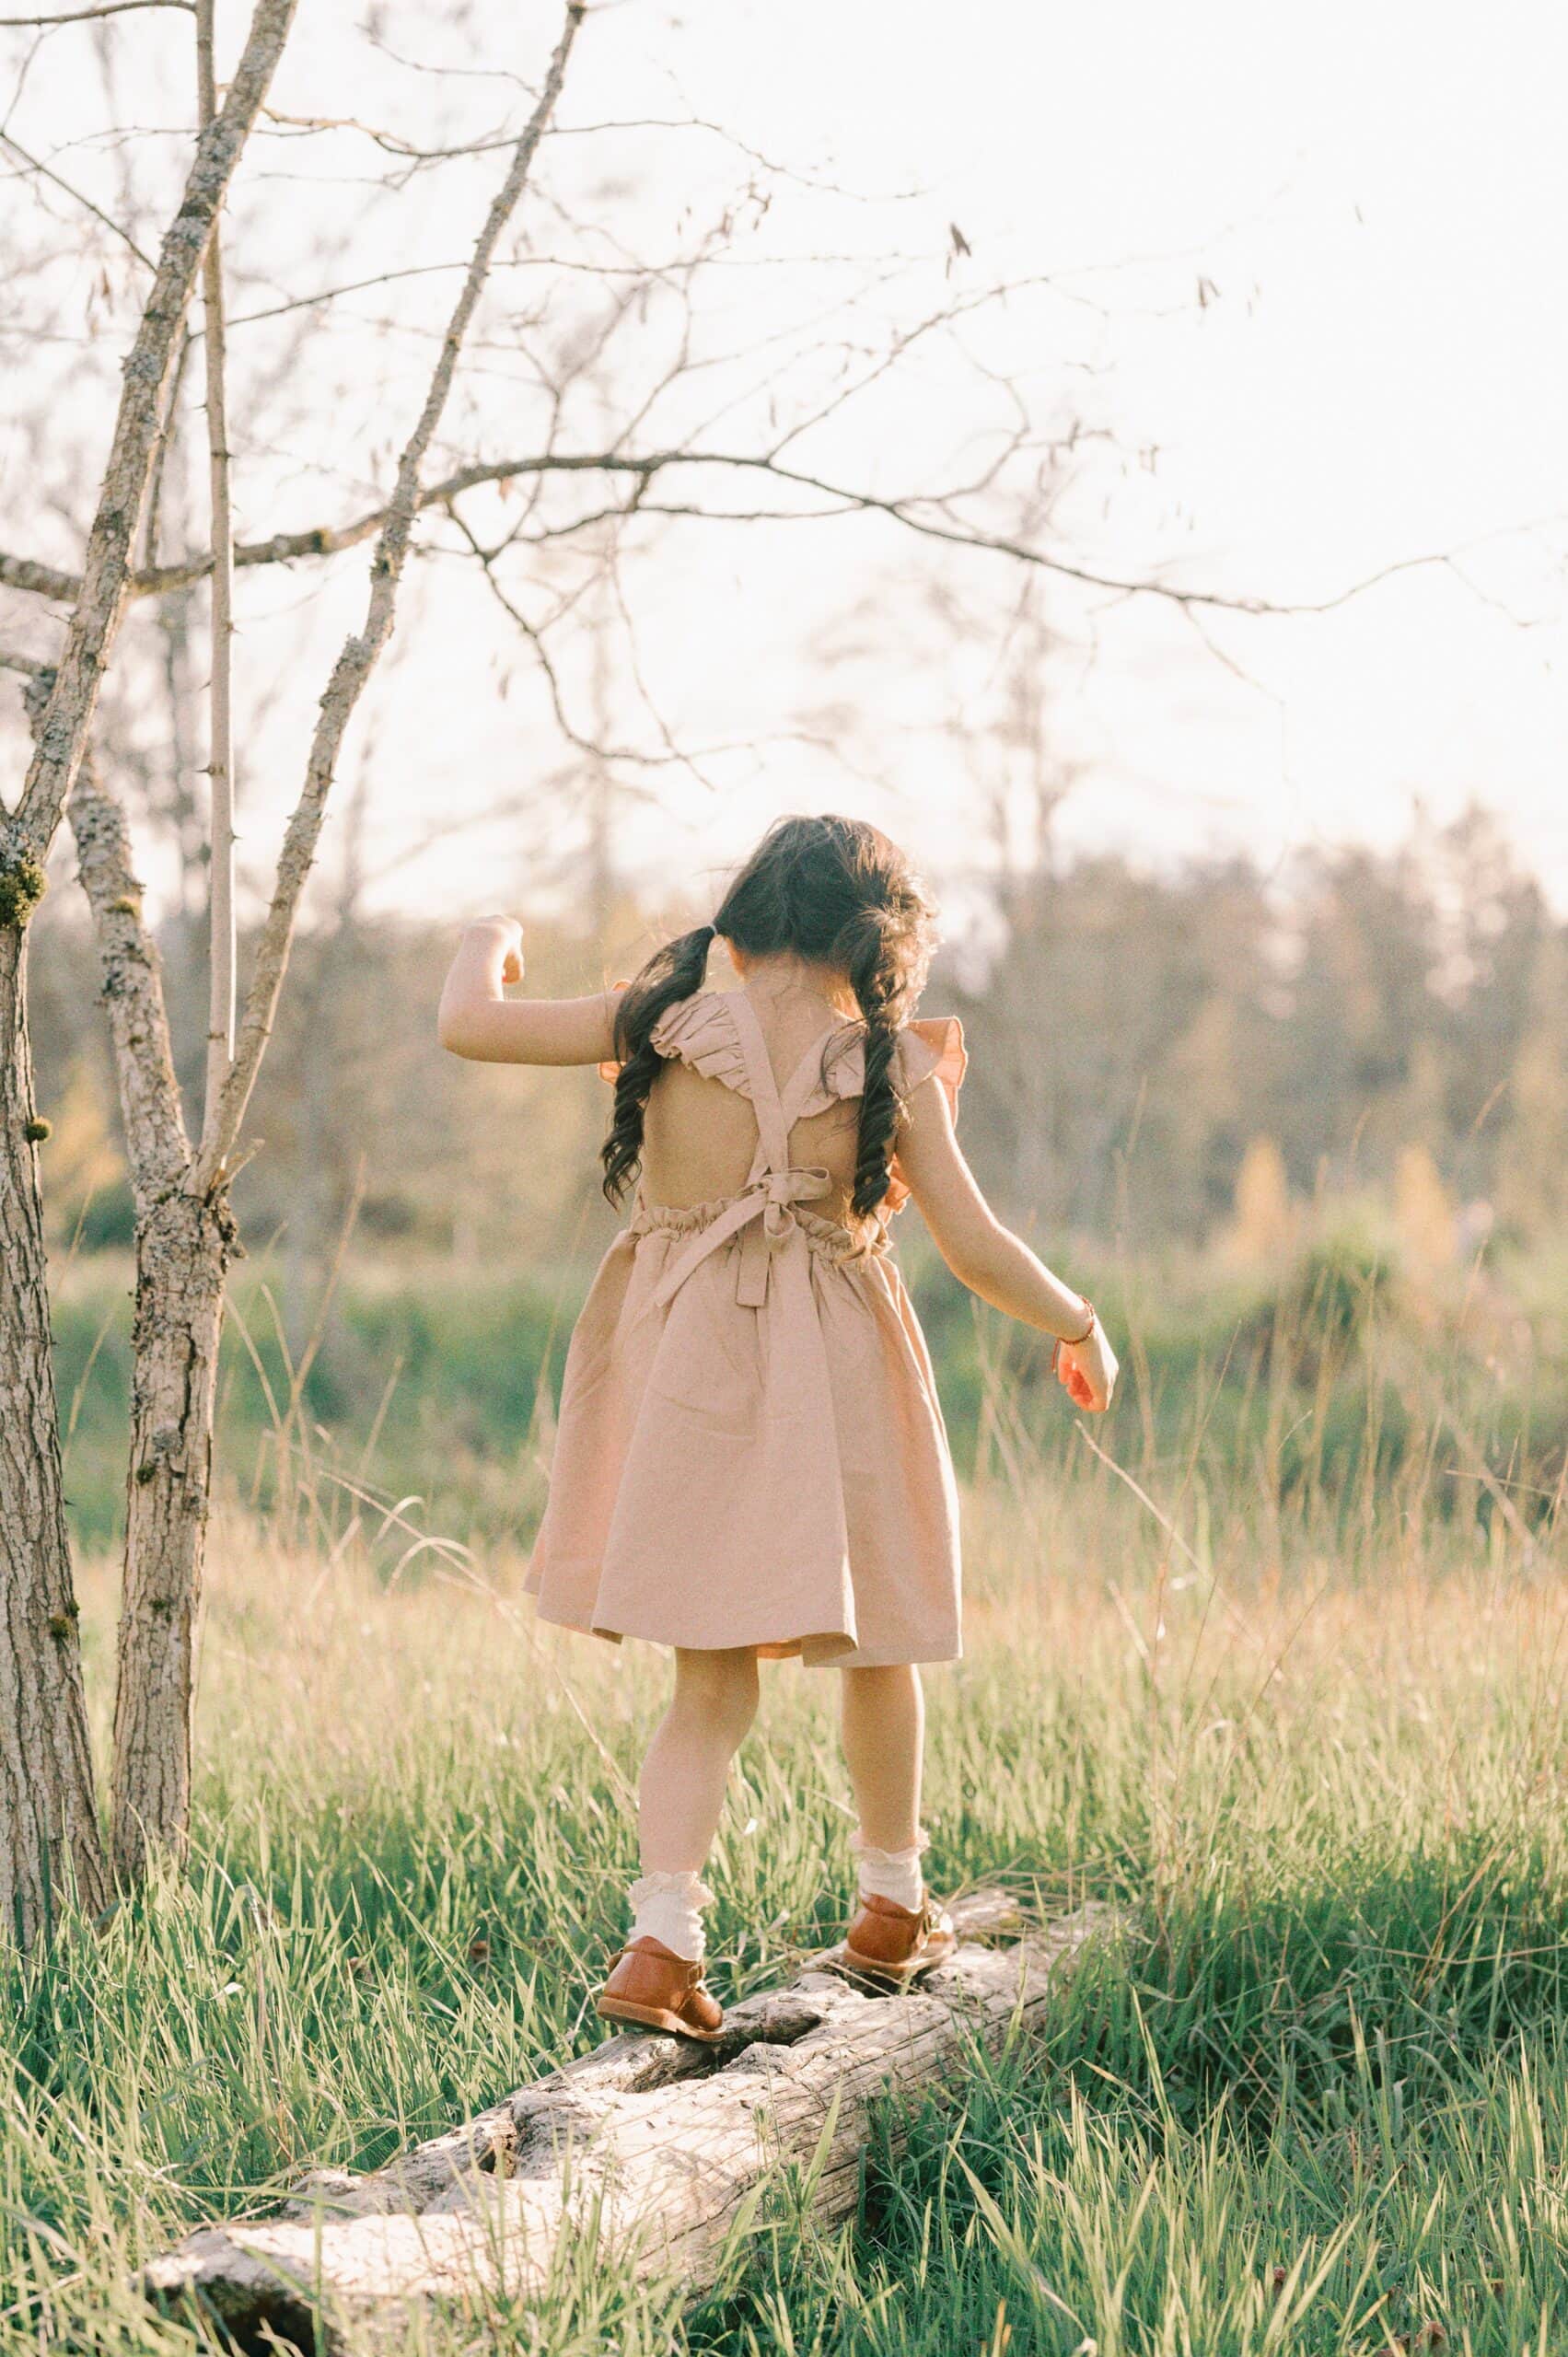 A young girl in a pink dress walks on a fallen log in a grassy park Seattle Preschools